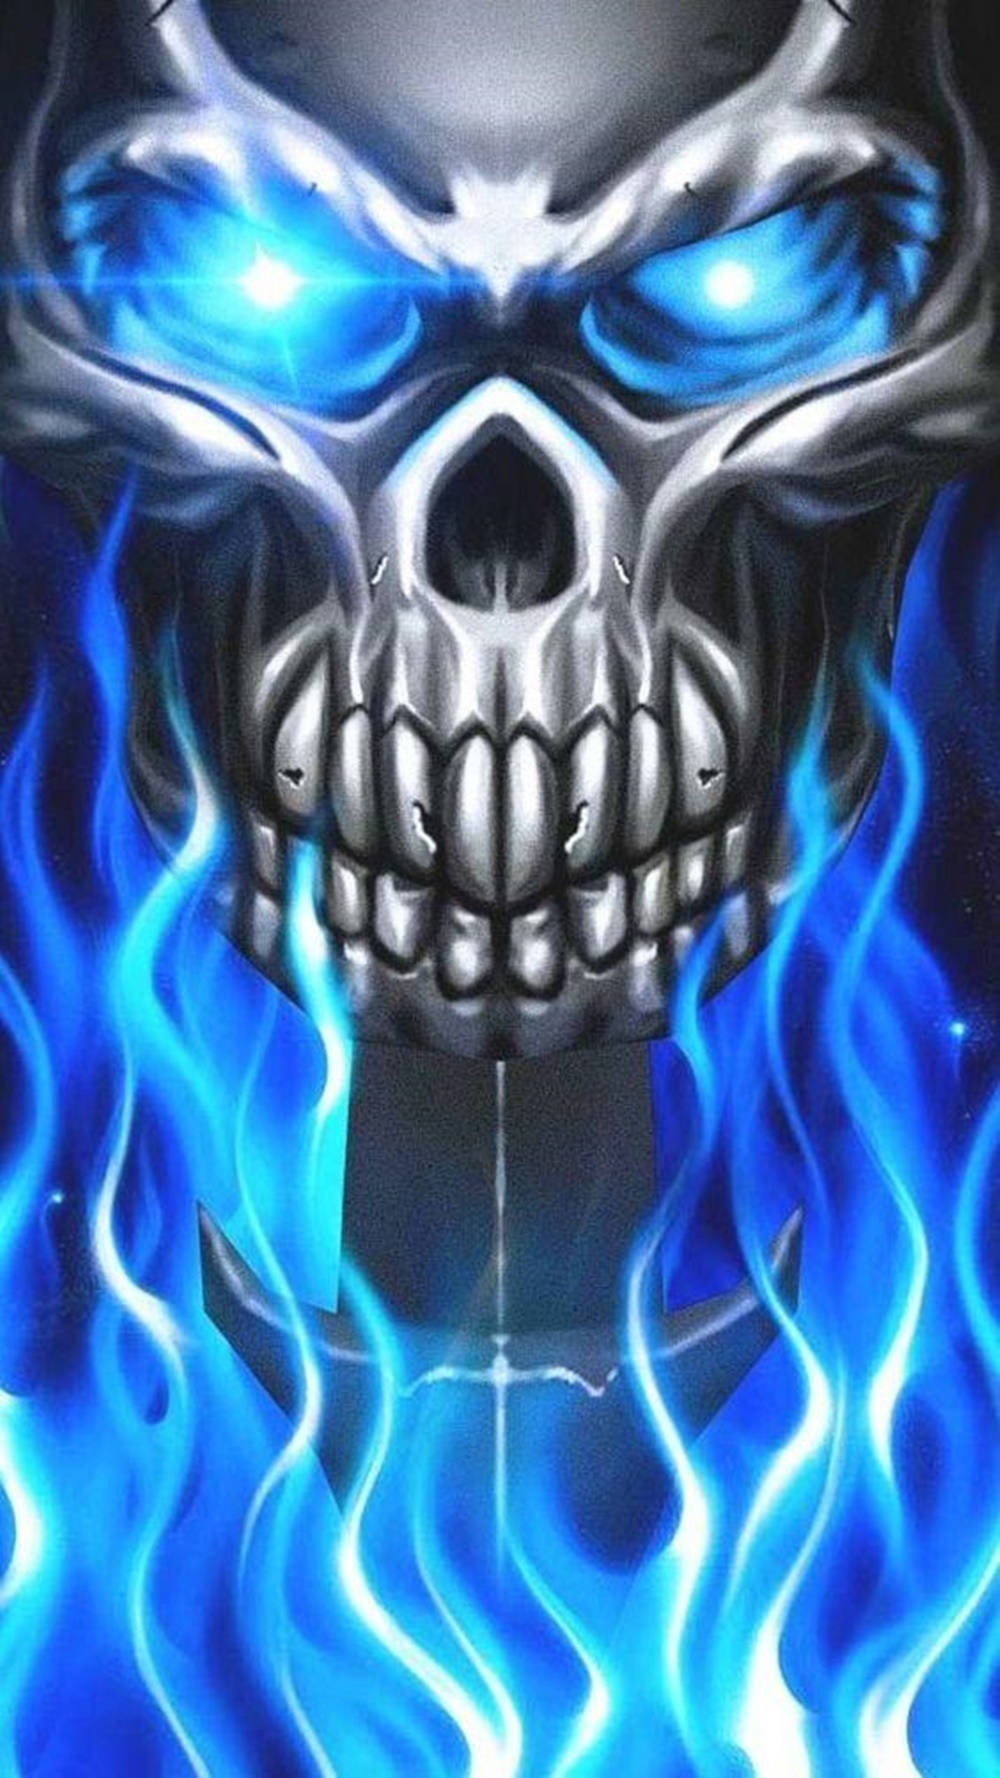 Free Ghost Rider Wallpaper Downloads, [100+] Ghost Rider Wallpapers for FREE  